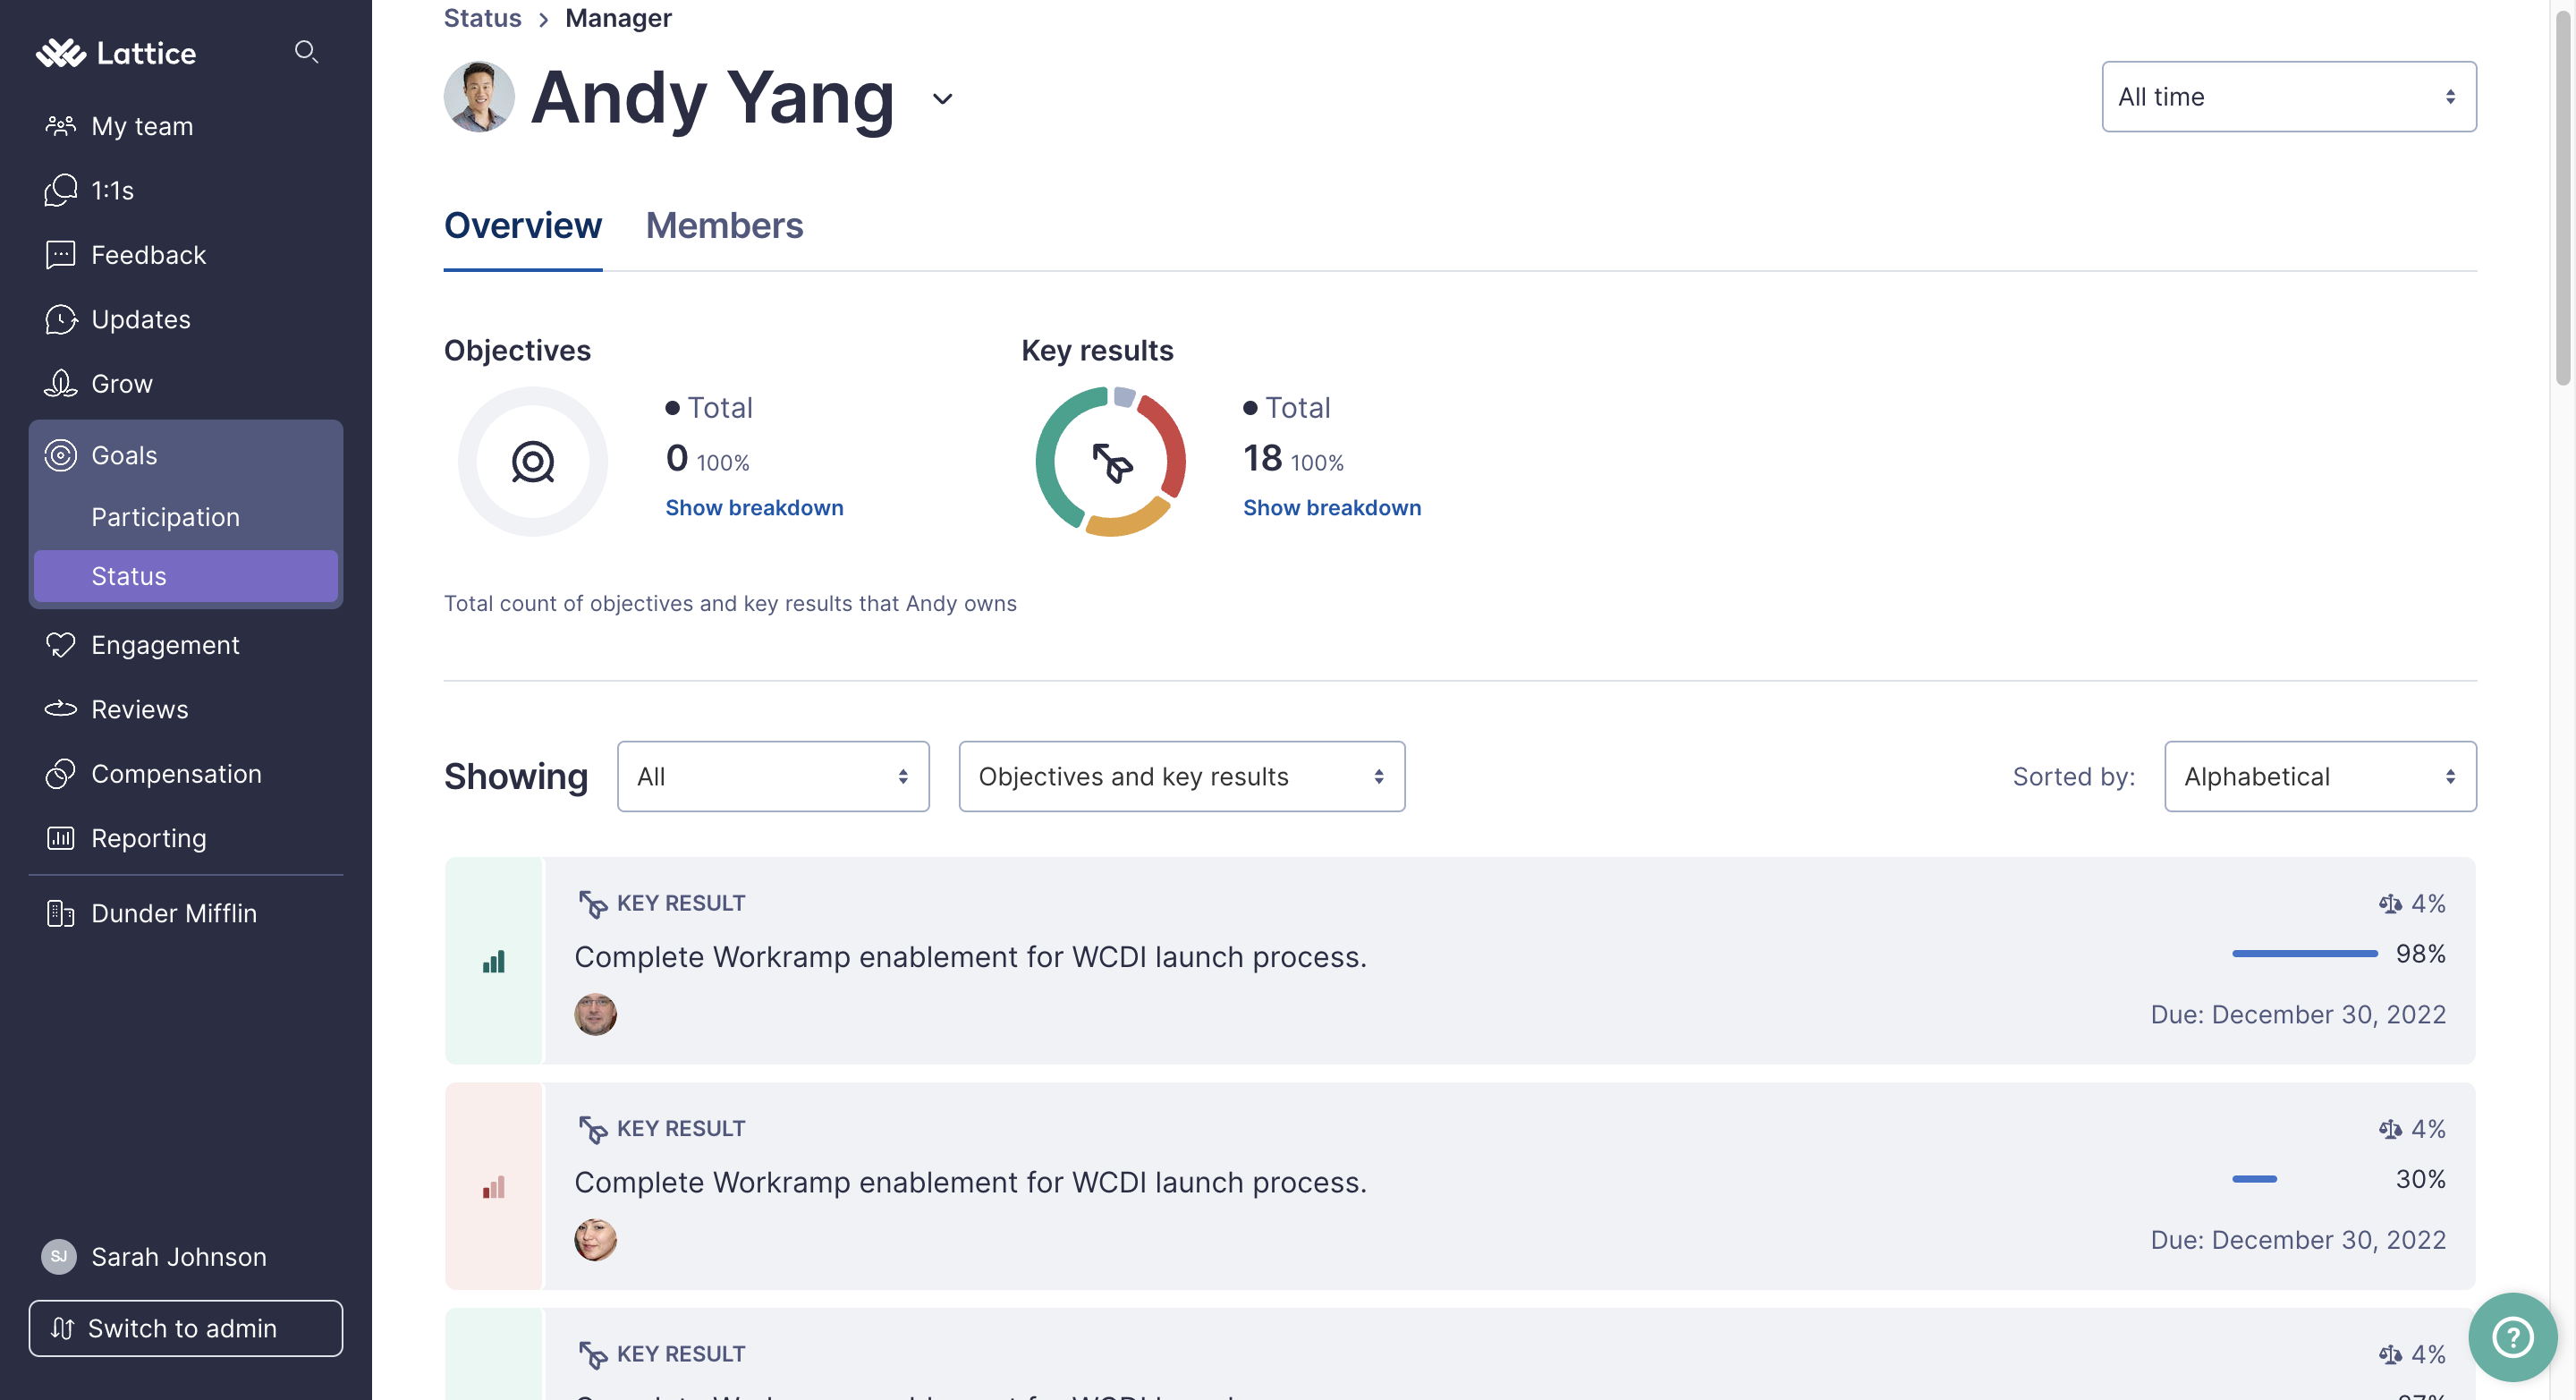 andy_yang_overview.png